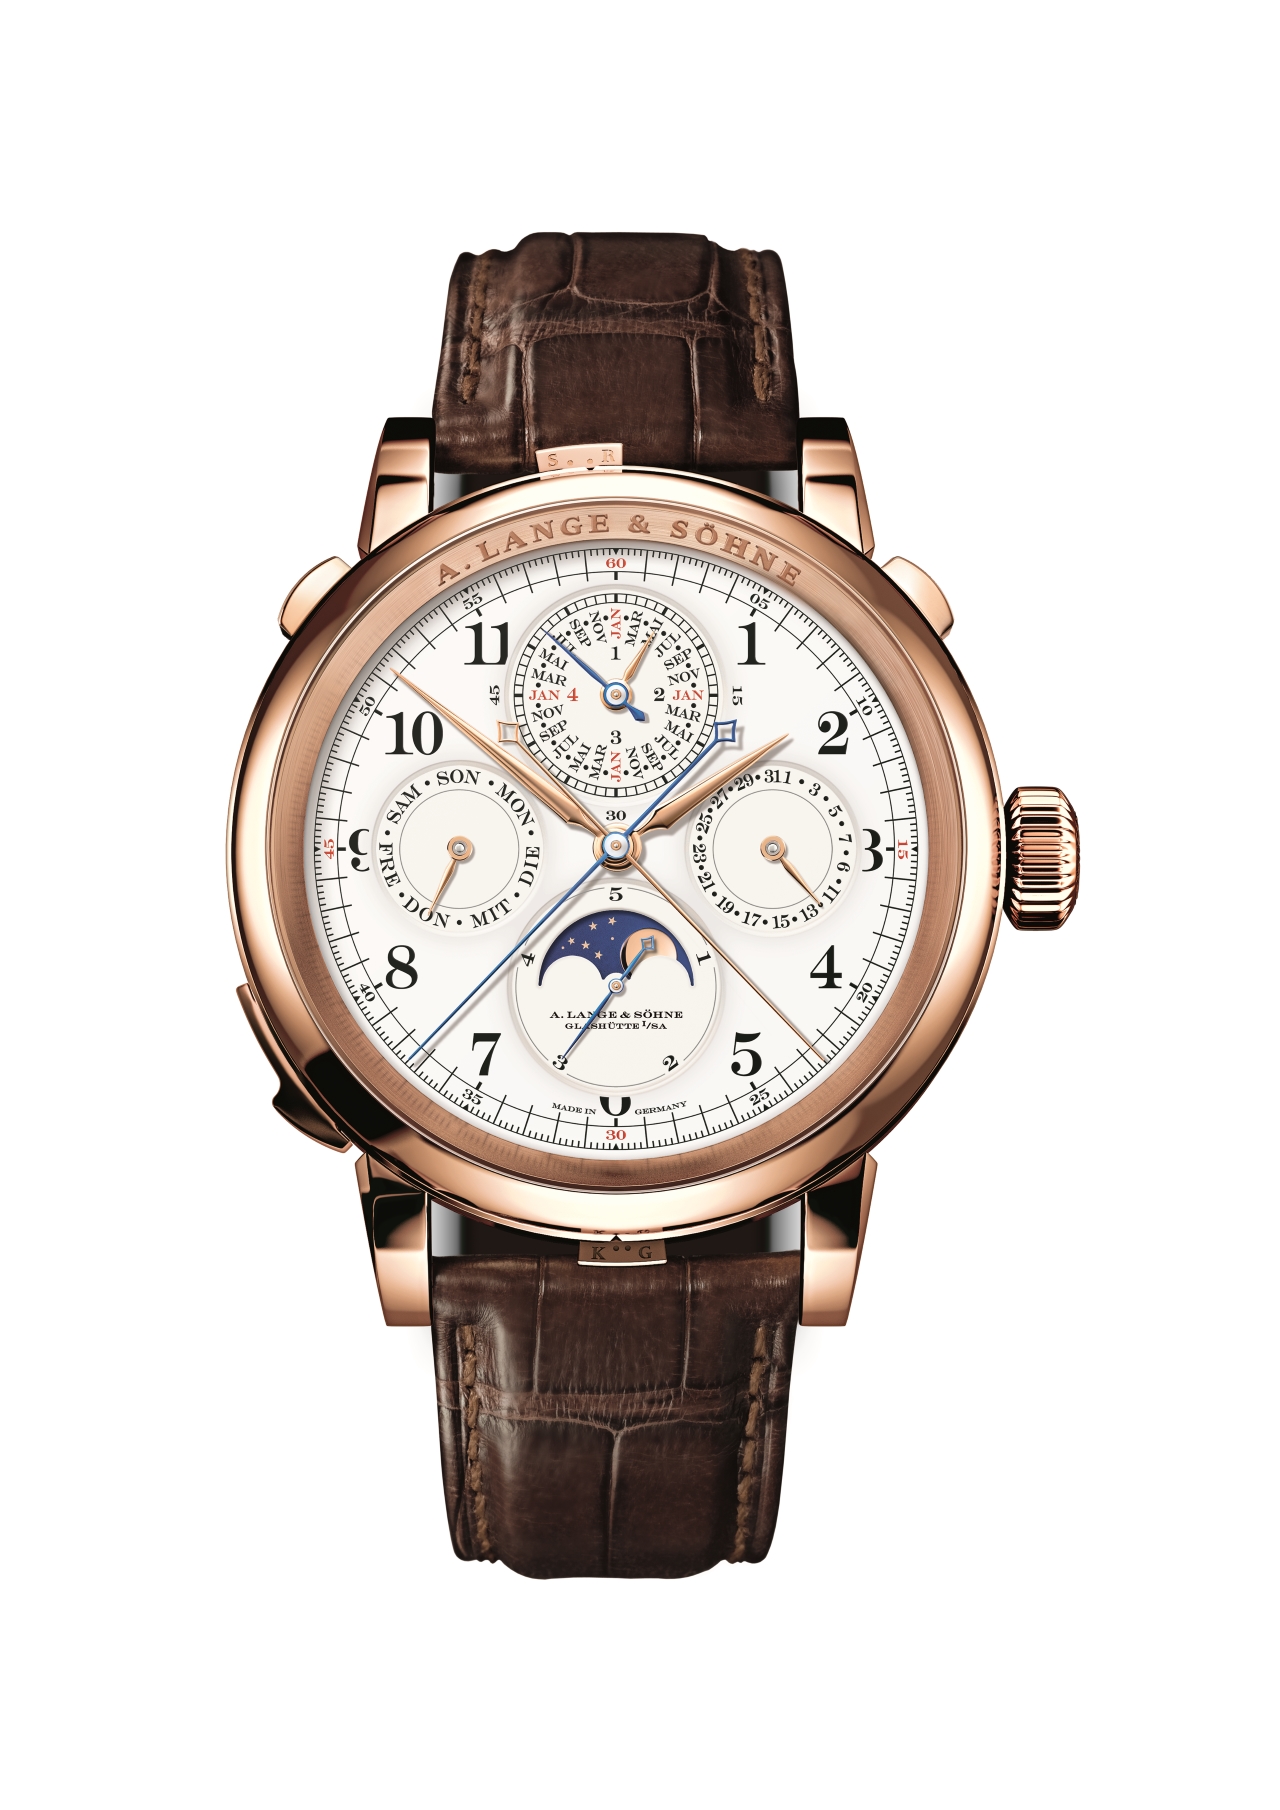 thumbThe GRAND COMPLICATION is the most complicated wristwatch everbuilt in Germany.